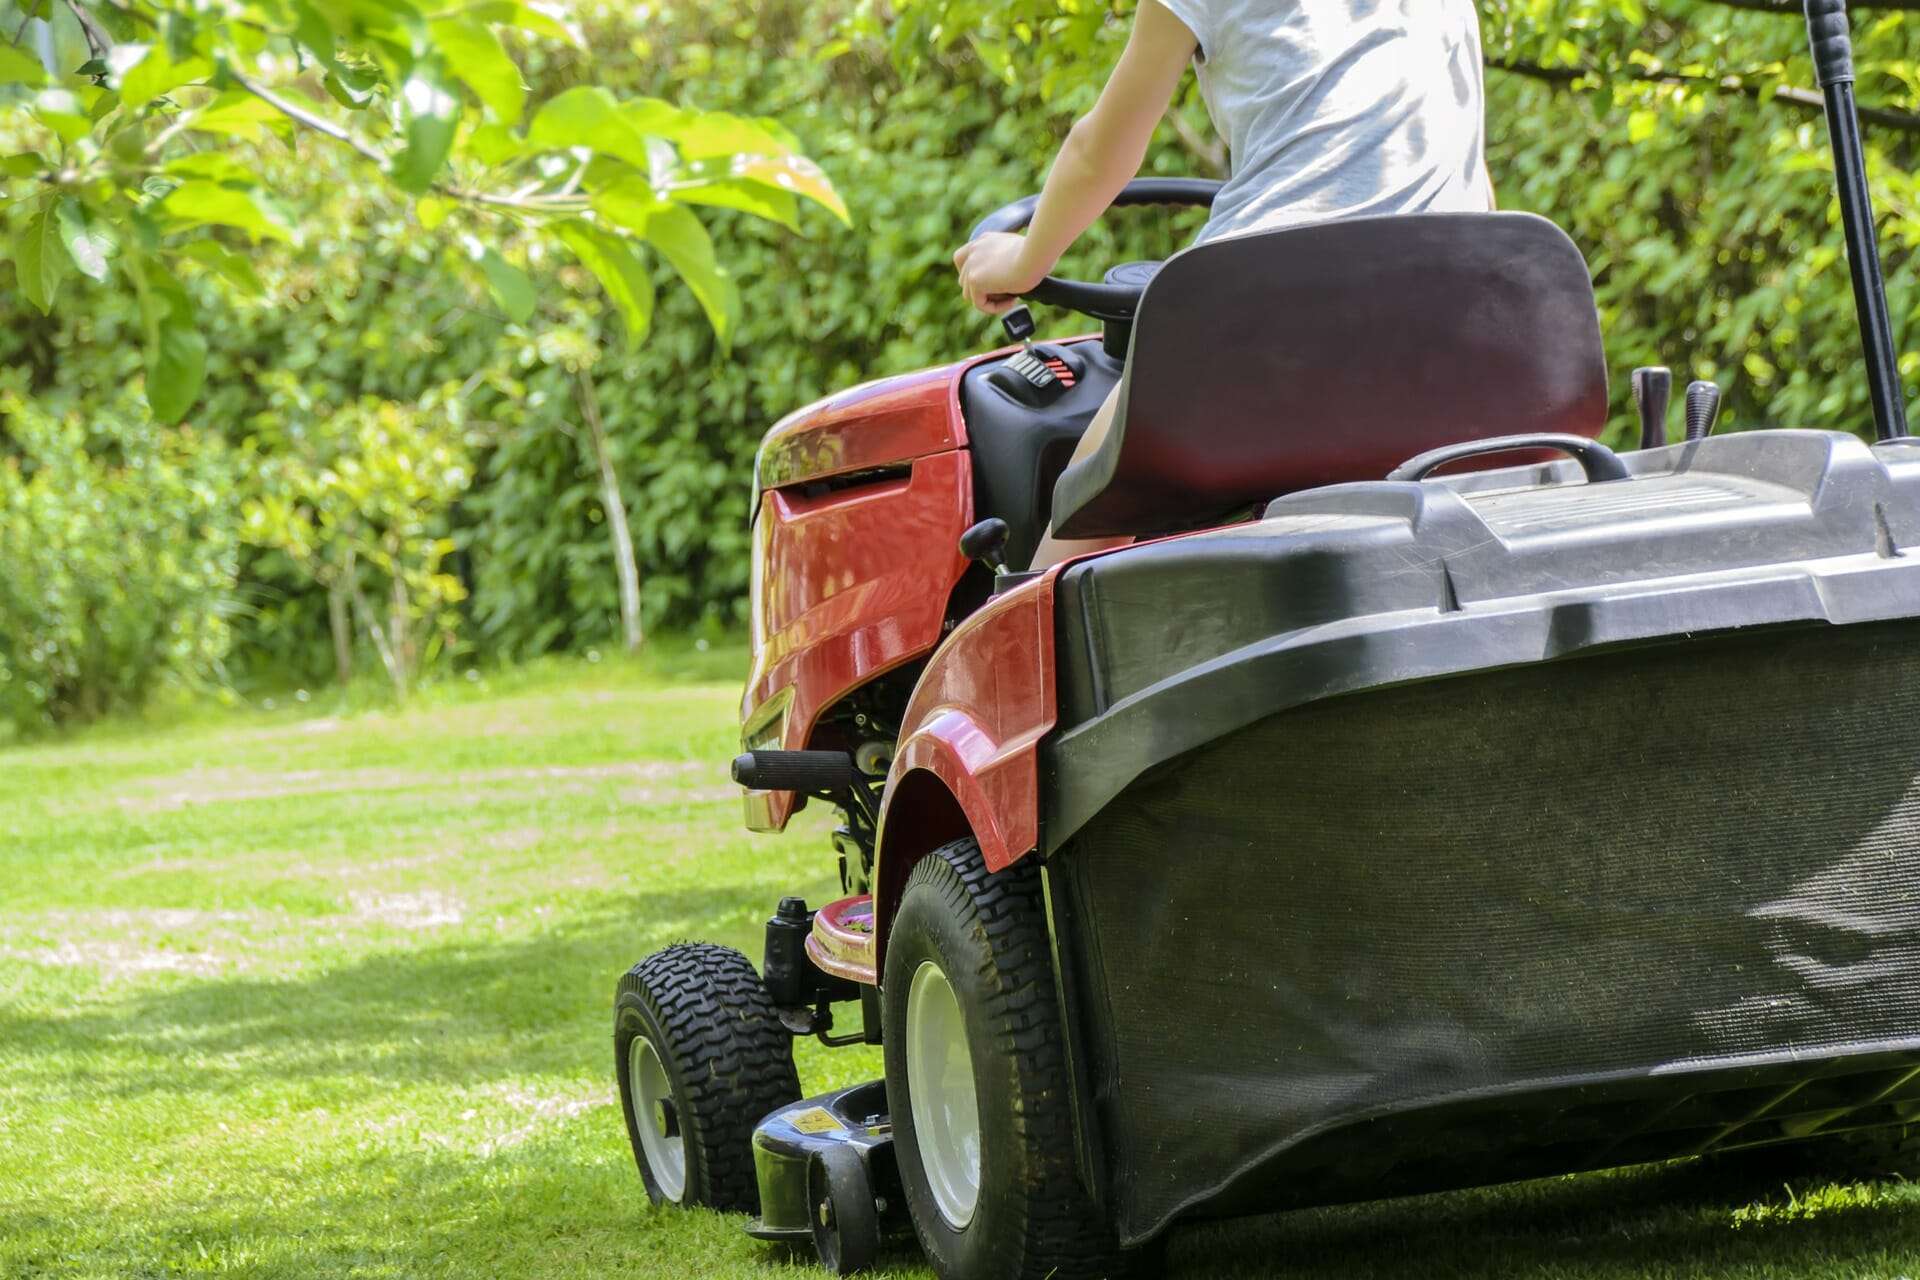 What to Look For in a Best Riding Lawn Mower for Small Yards